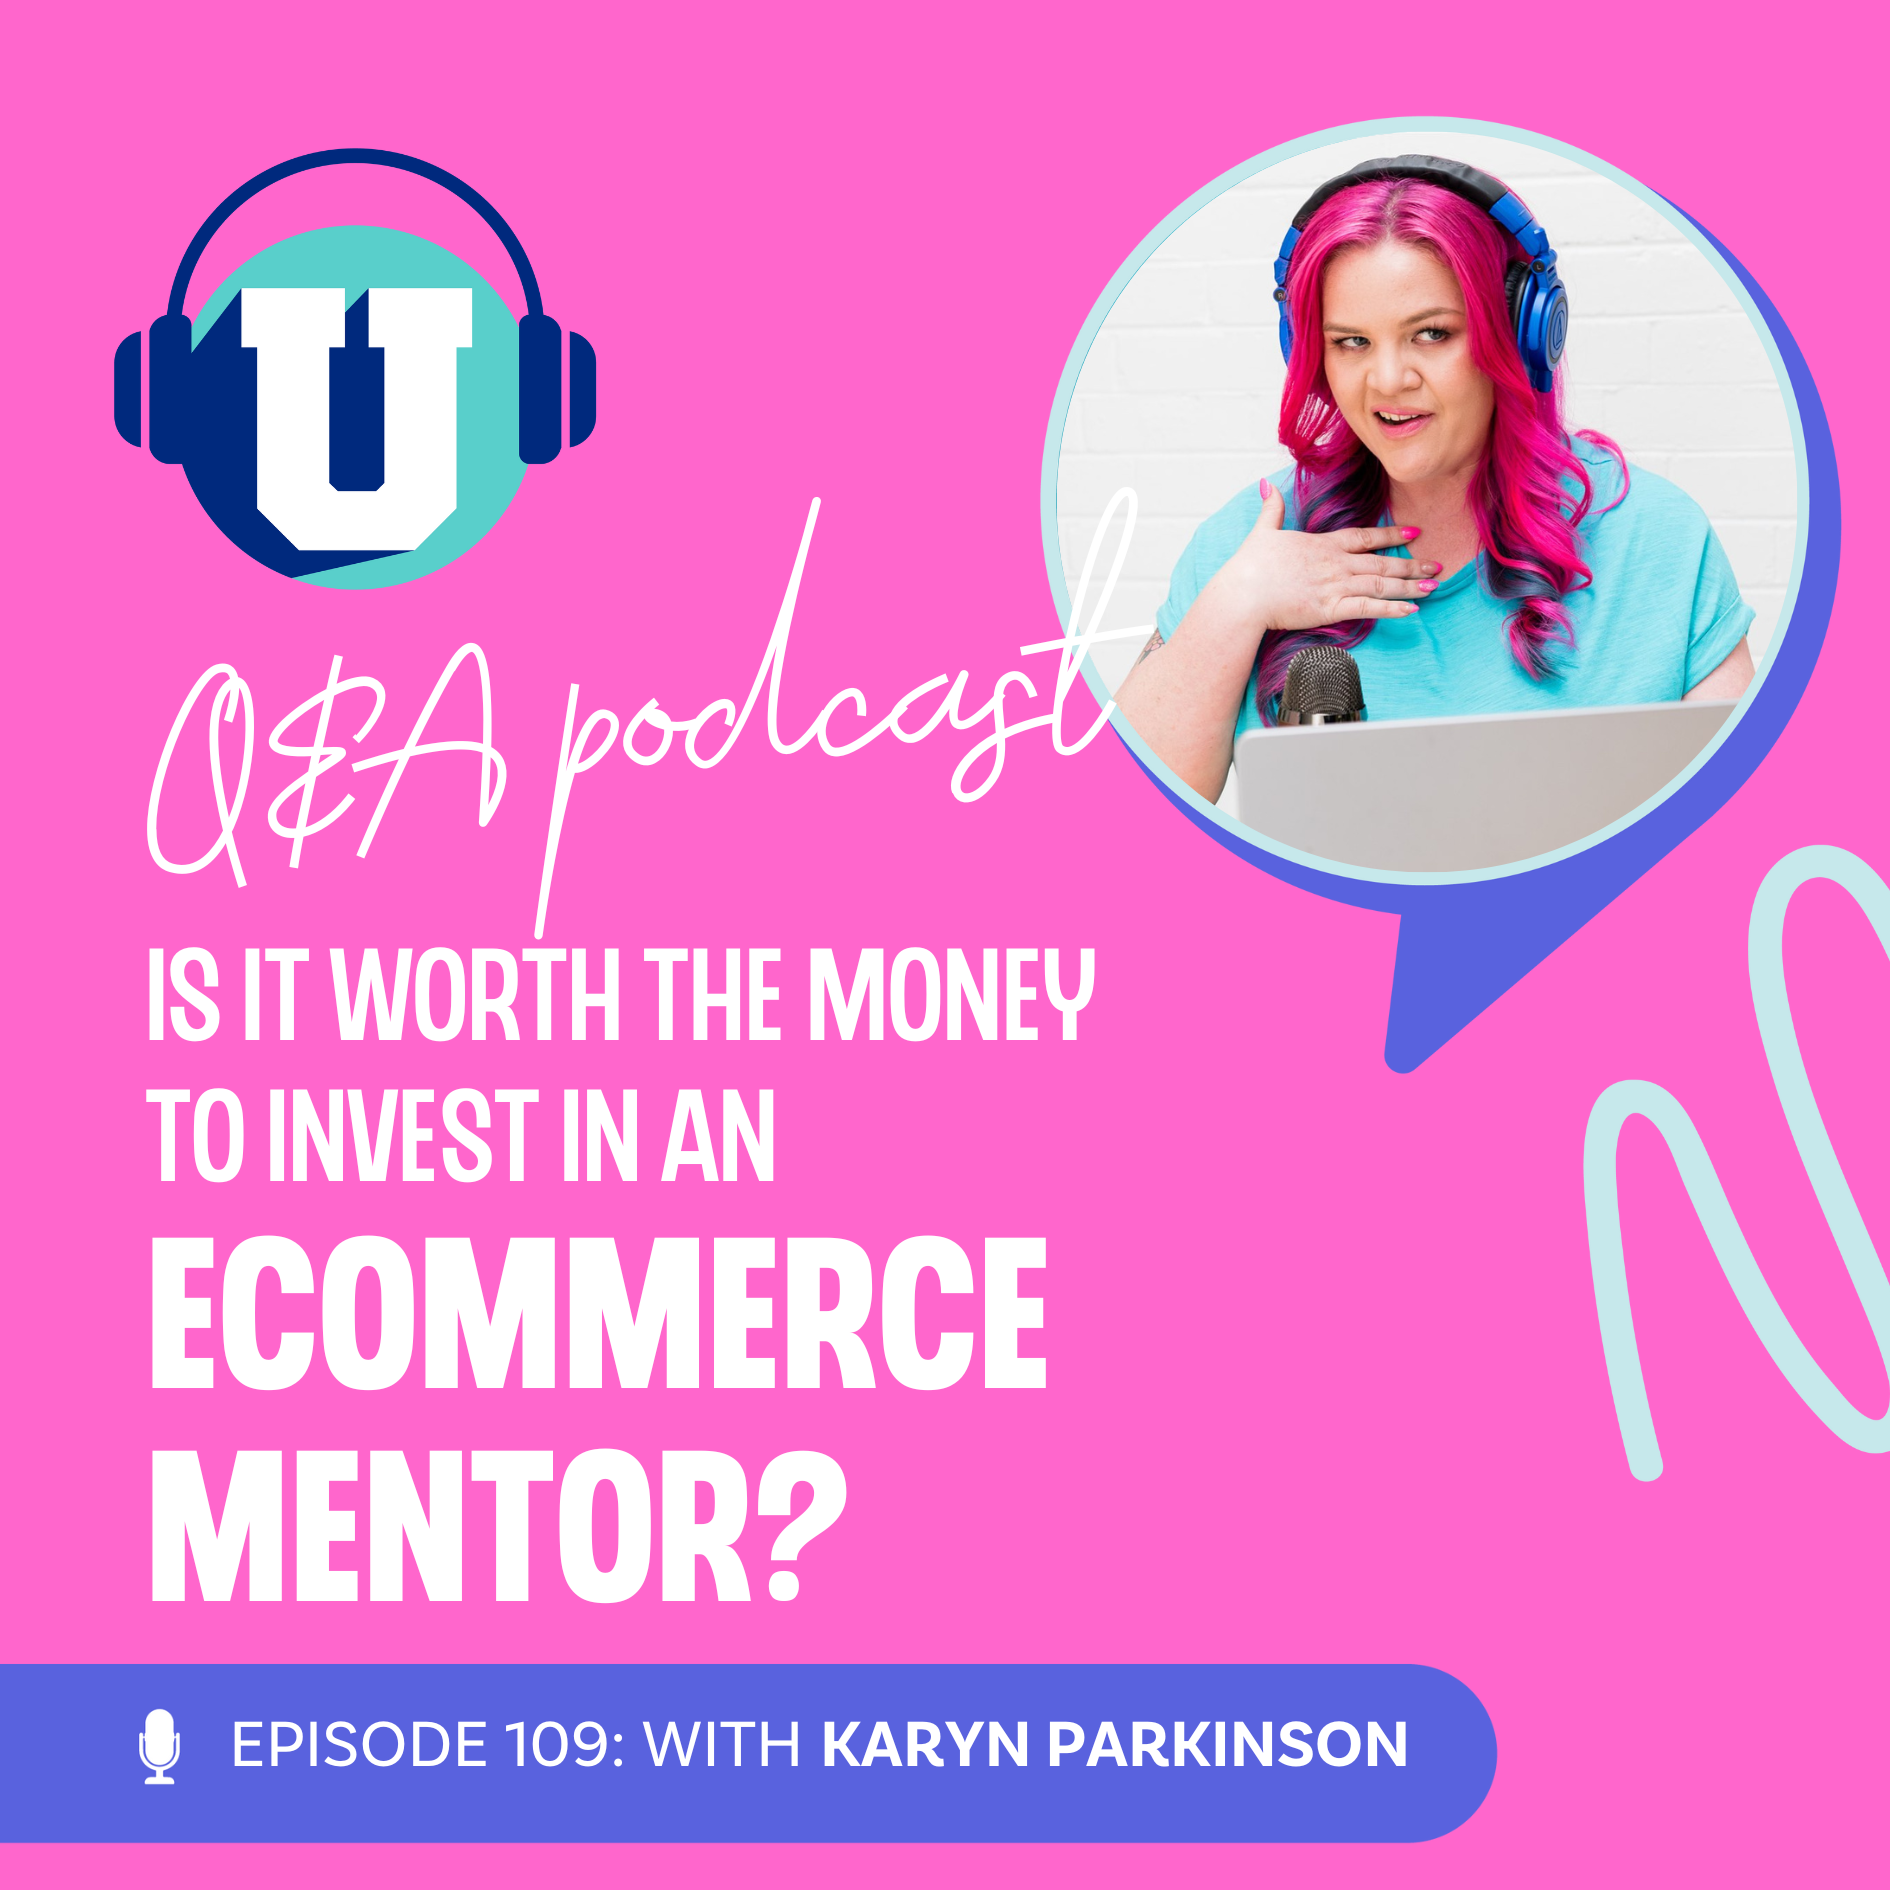 Q&A: Is it worth the money to invest in an eCommerce mentor